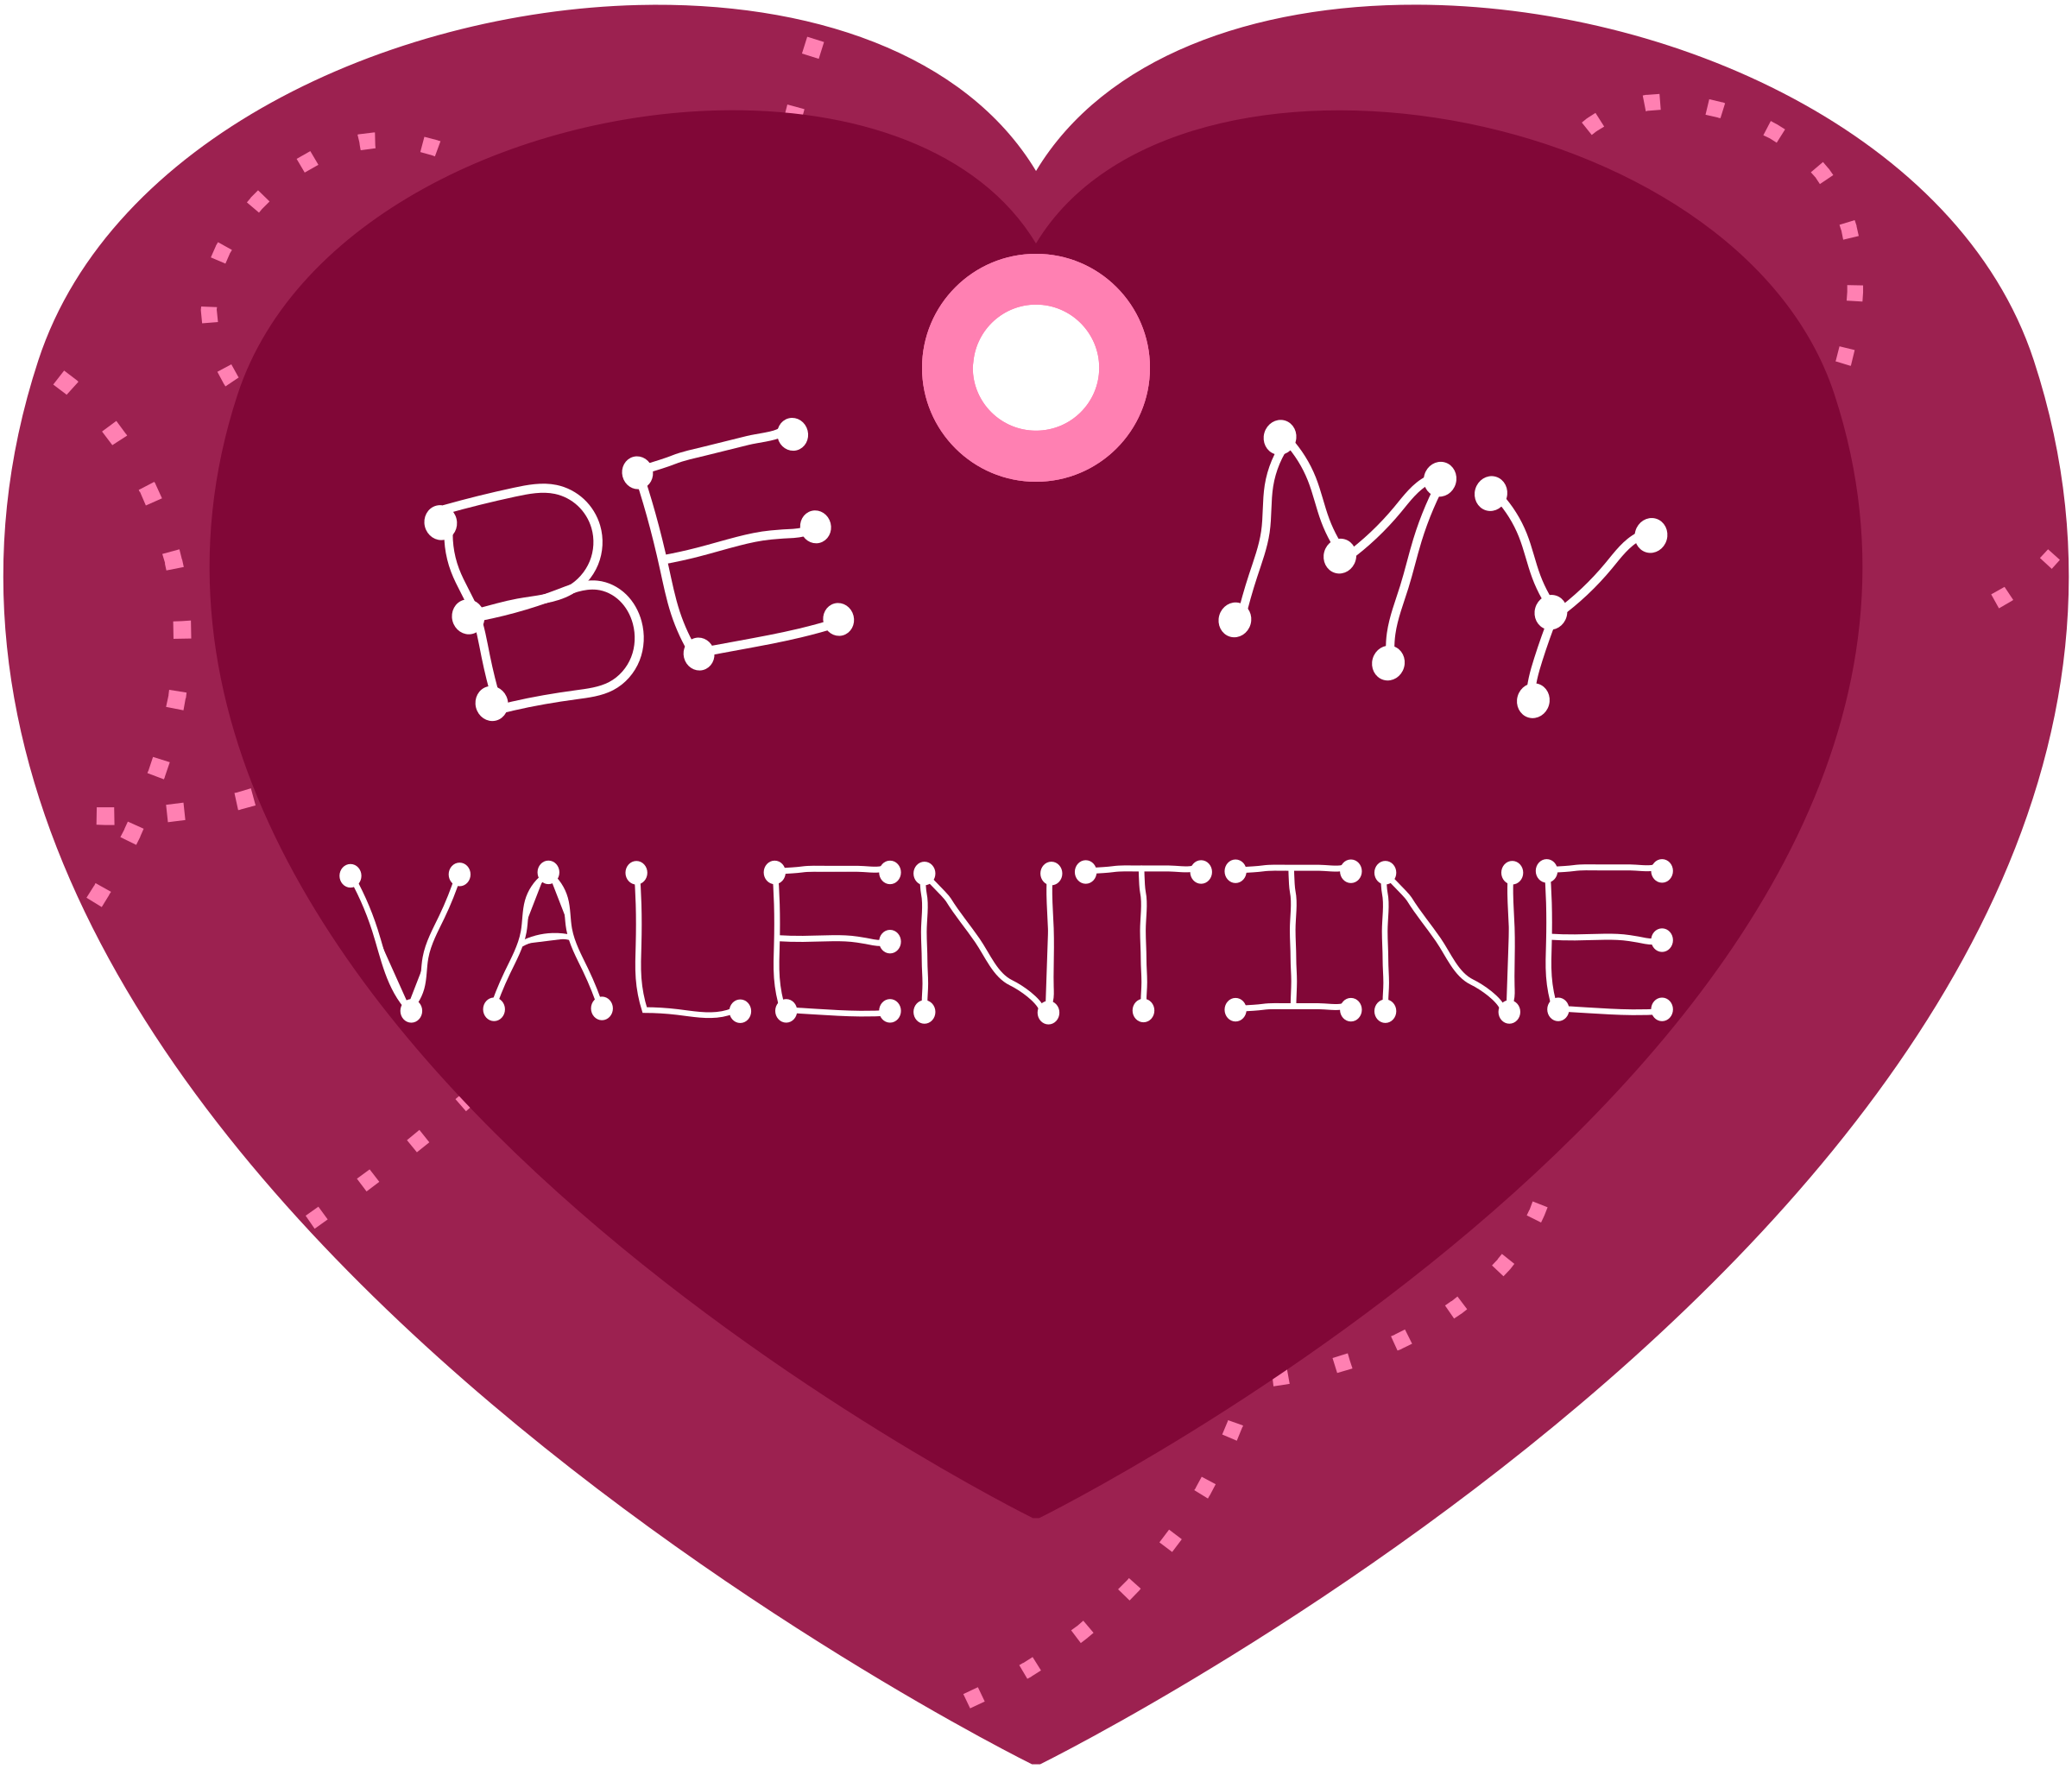 Valentine clipart tag, Valentine tag Transparent FREE for download on